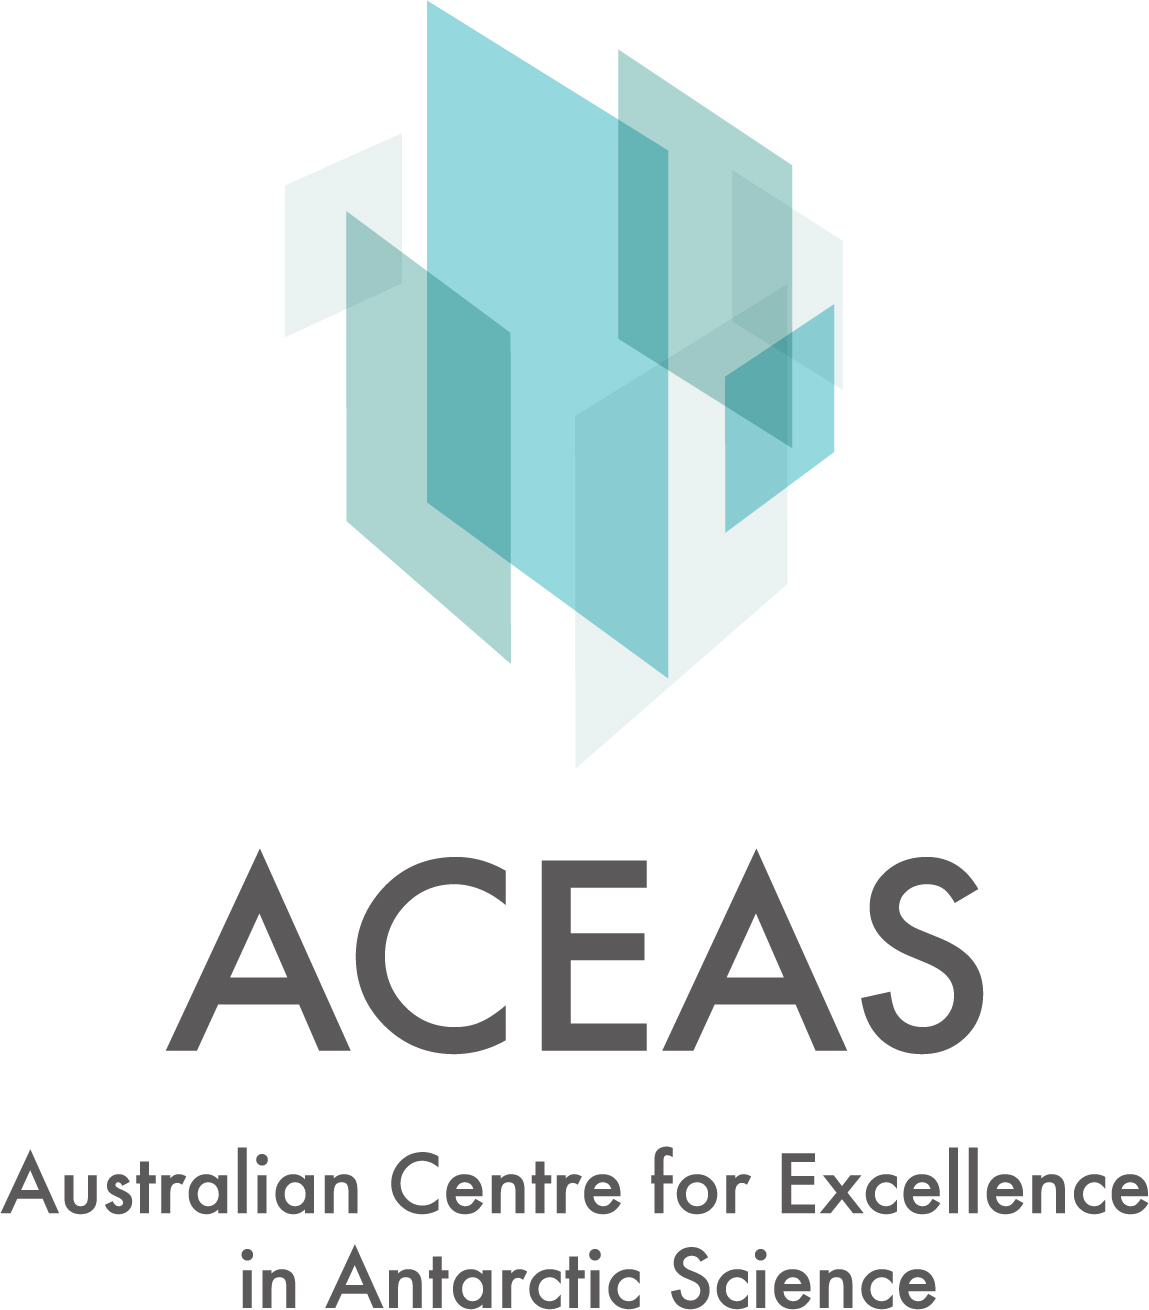 Australian Centre for Excellence in Antarctic Science